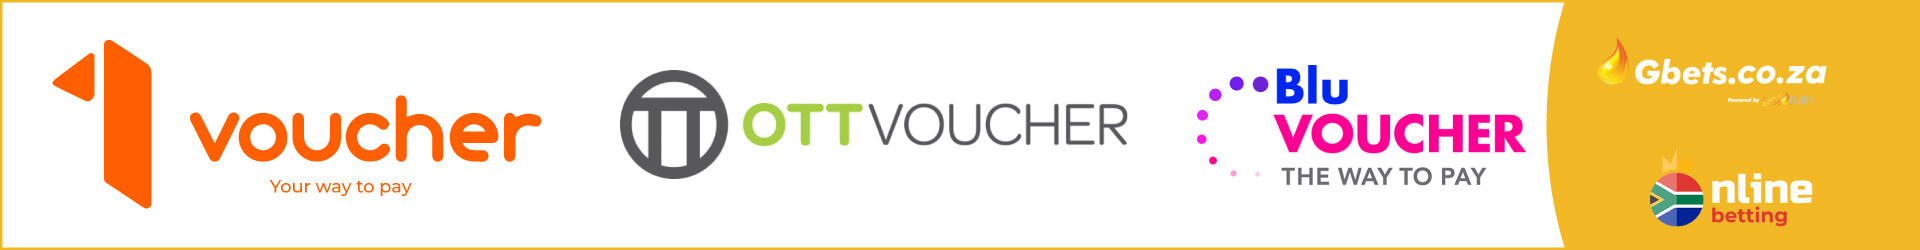 How to deposit money to Gbets using Voucher